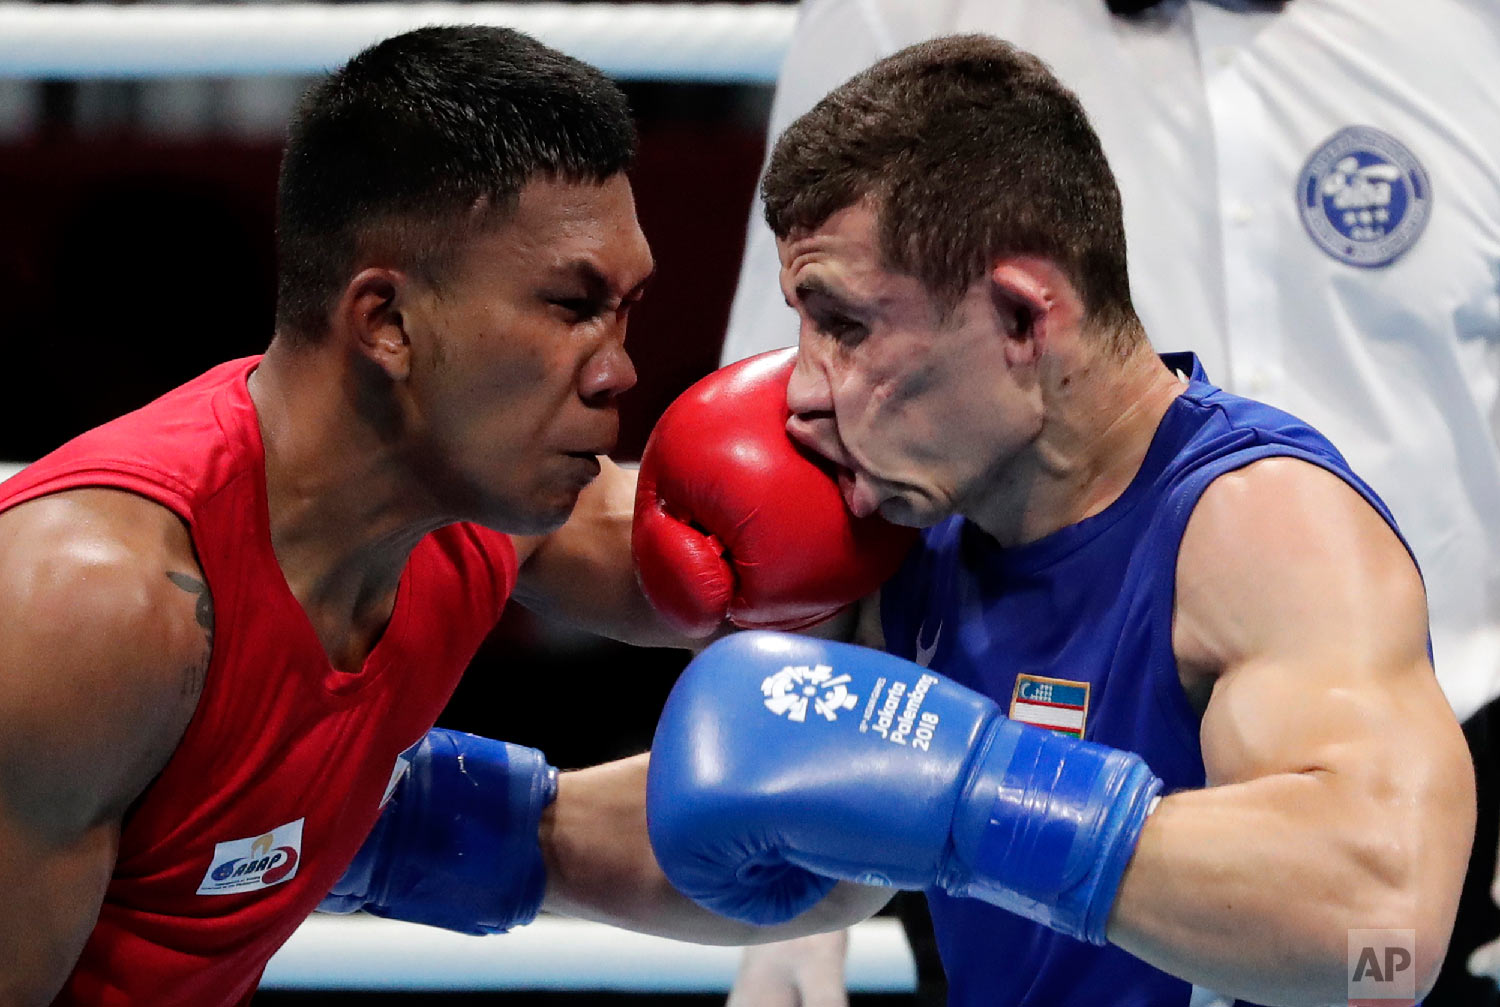  Phillippines' Eumir Felix Marcial, left, lands a blow on the face of Uzbekistan's Israil Madrimov during their men's middleweight boxing semifinal at the 18th Asian Games in Jakarta, Indonesia, on Aug. 31, 2018. (AP Photo/Lee Jin-man) 